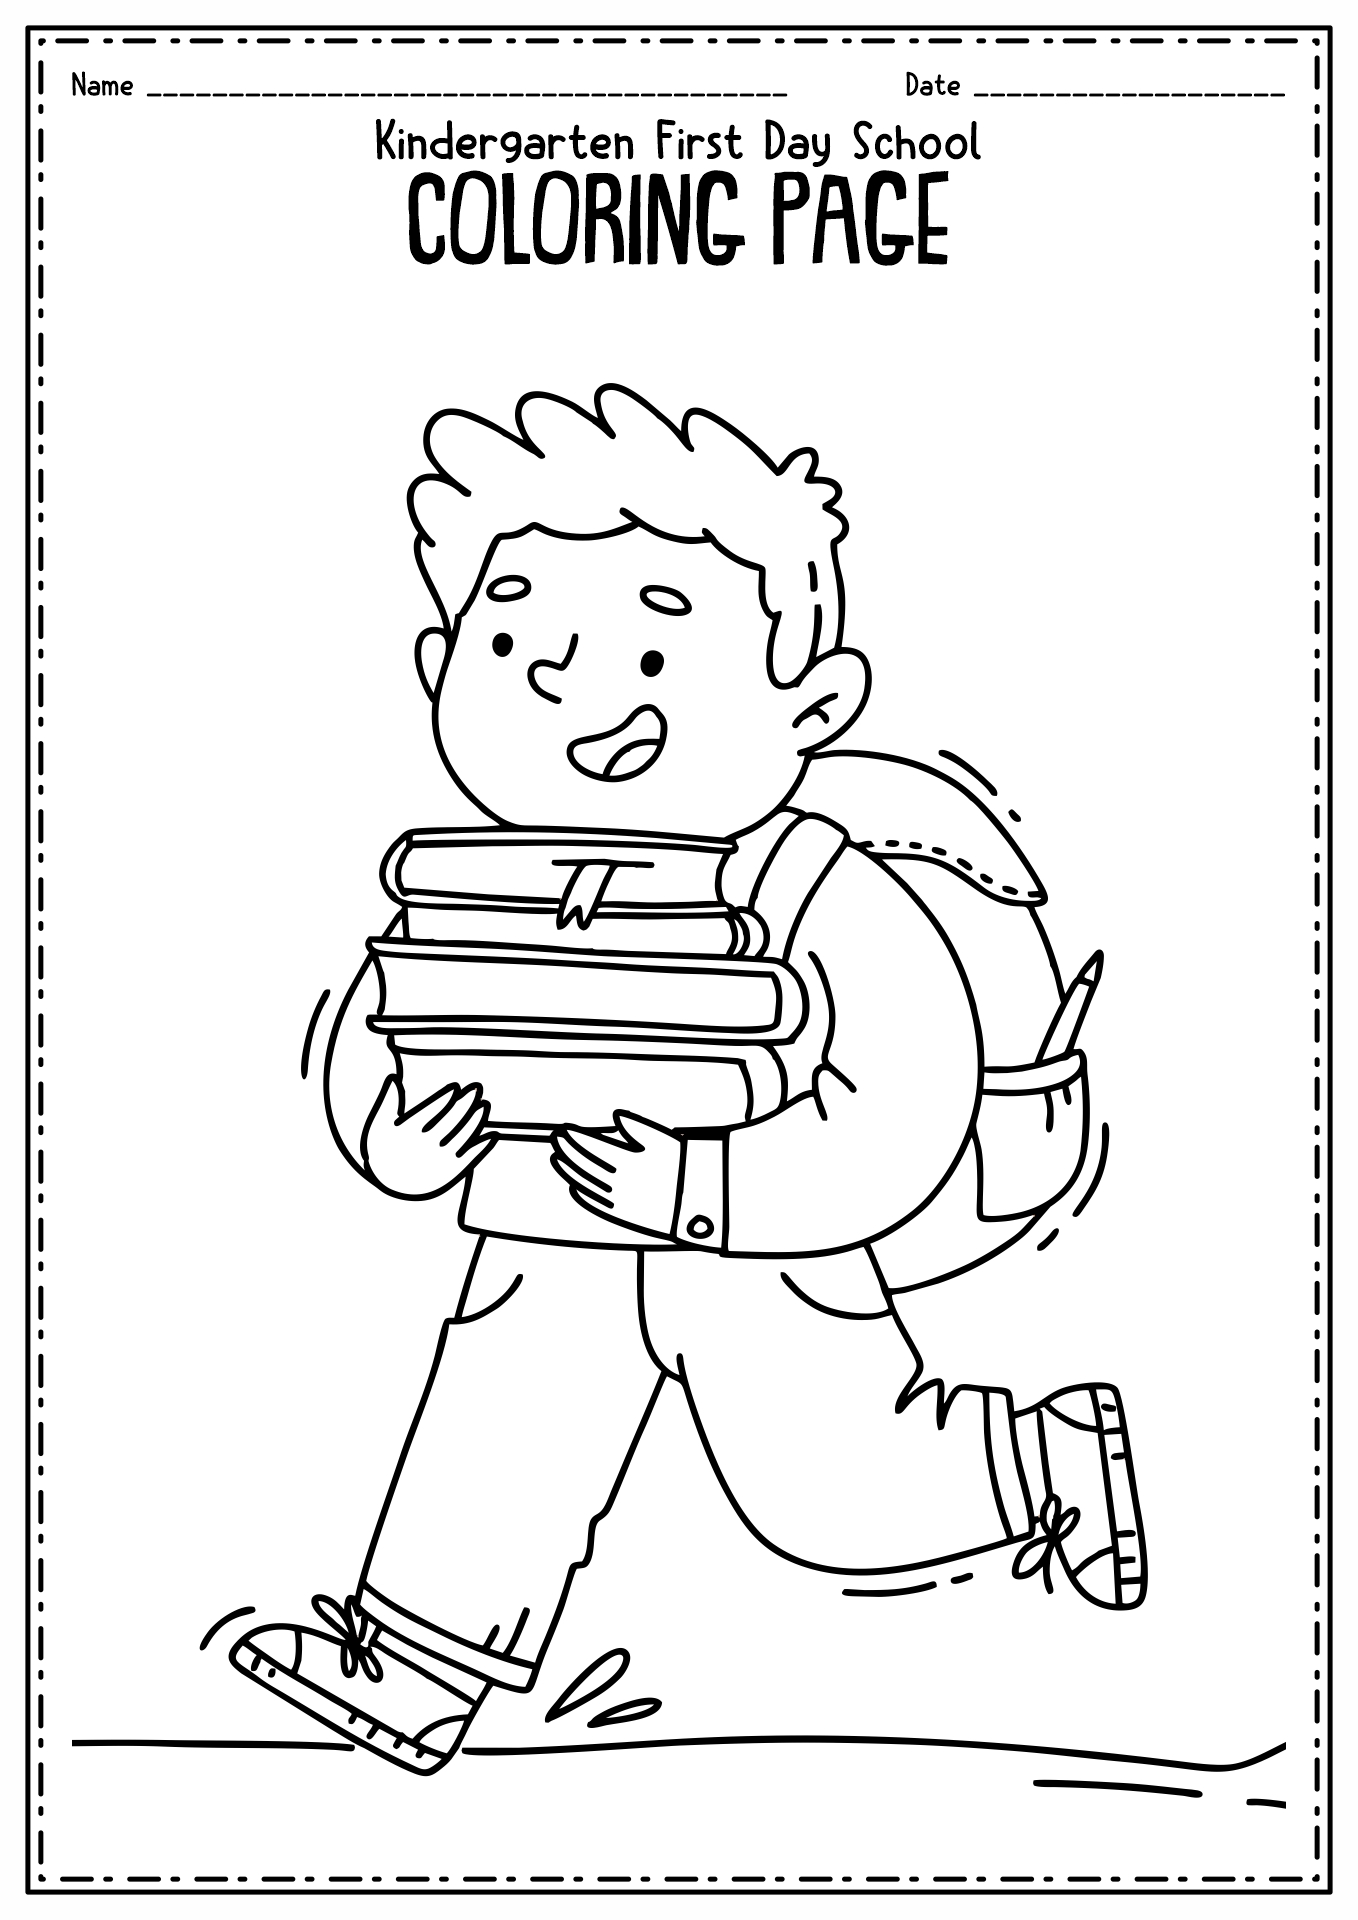 First Day of School Kindergarten Coloring Page